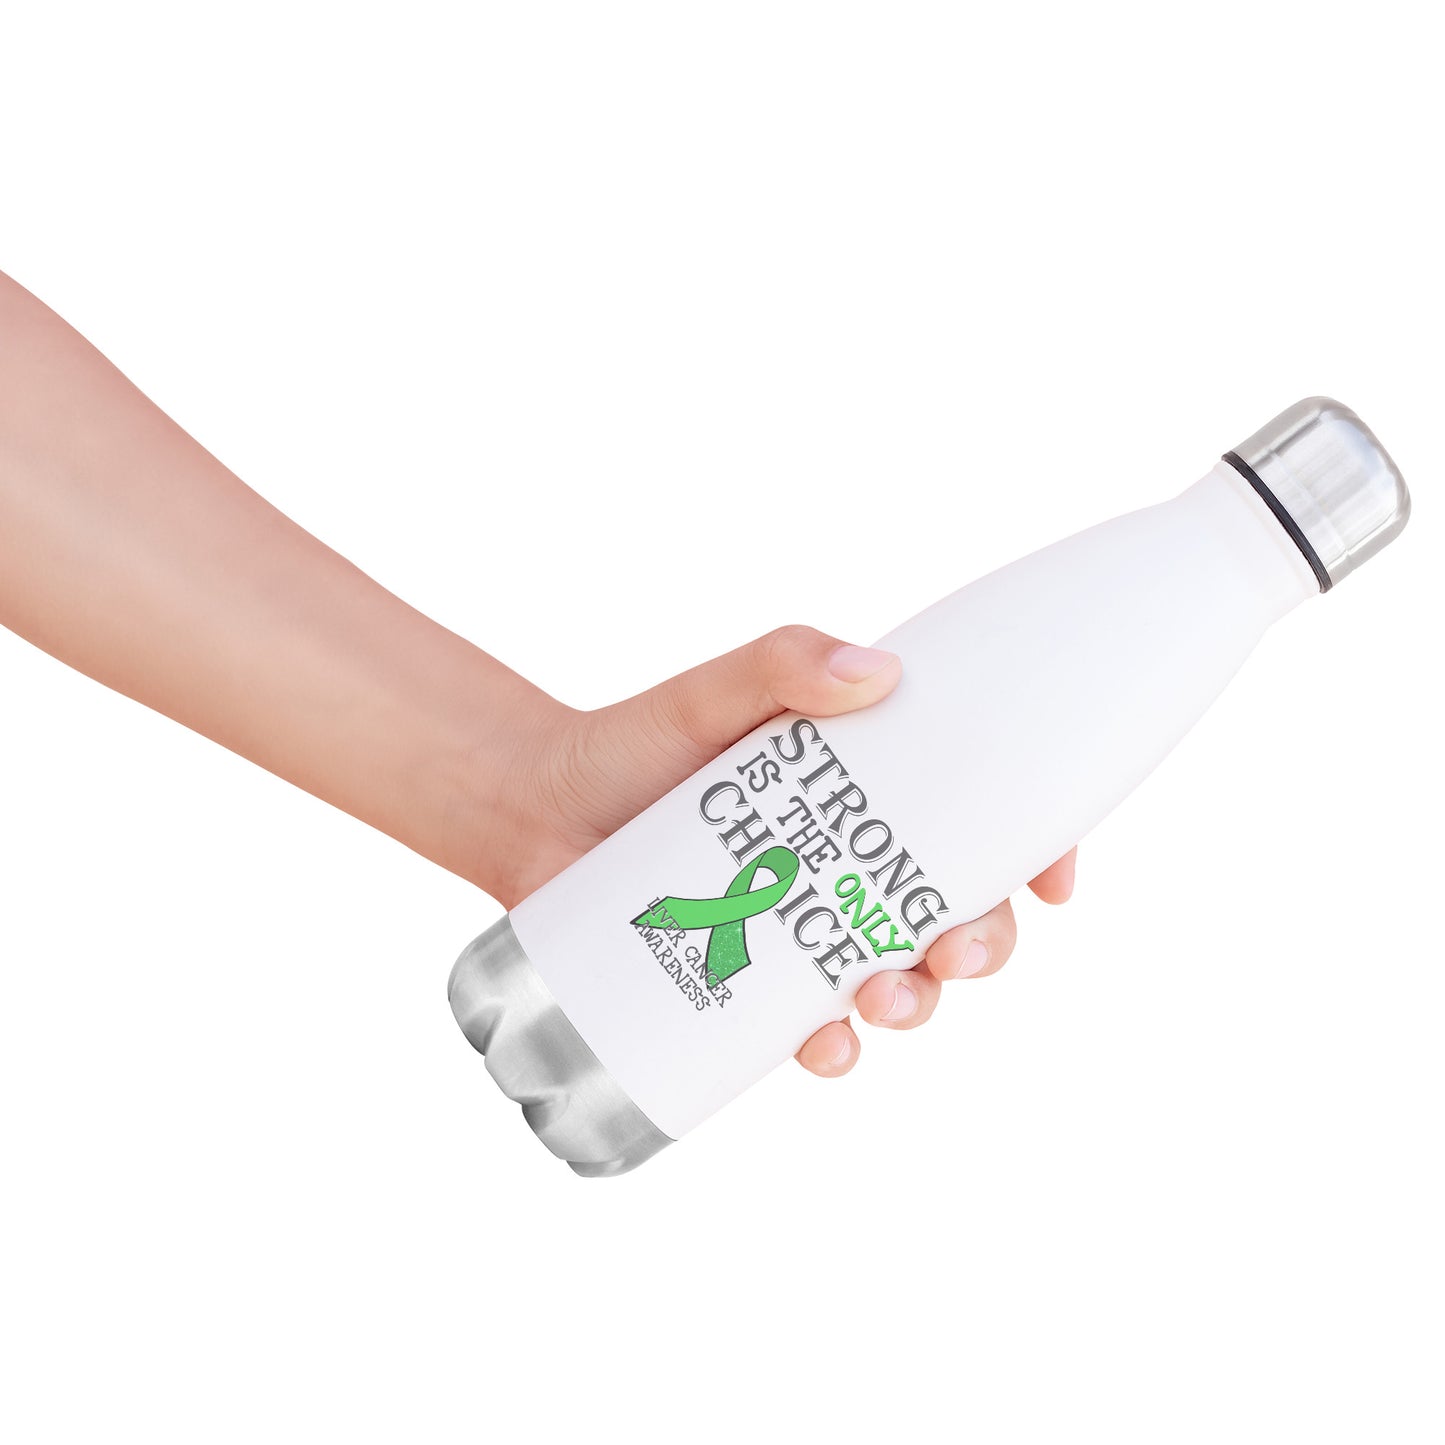 Strong is the Only Choice -Liver Cancer Awareness 20oz Insulated Water Bottle